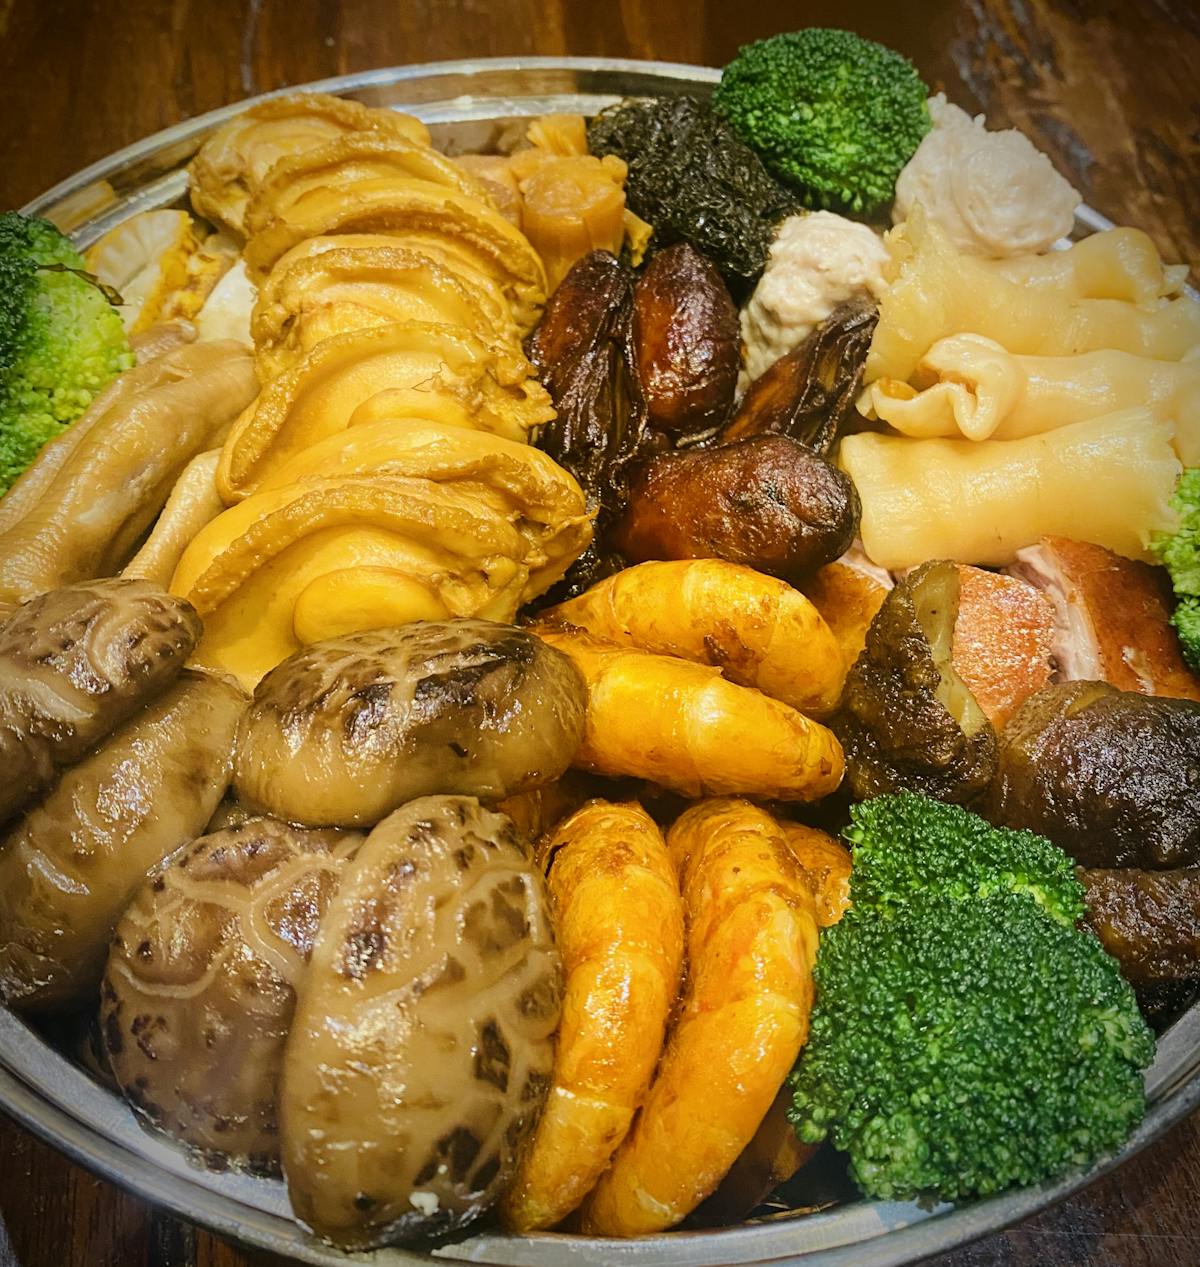 a plate of food with broccoli